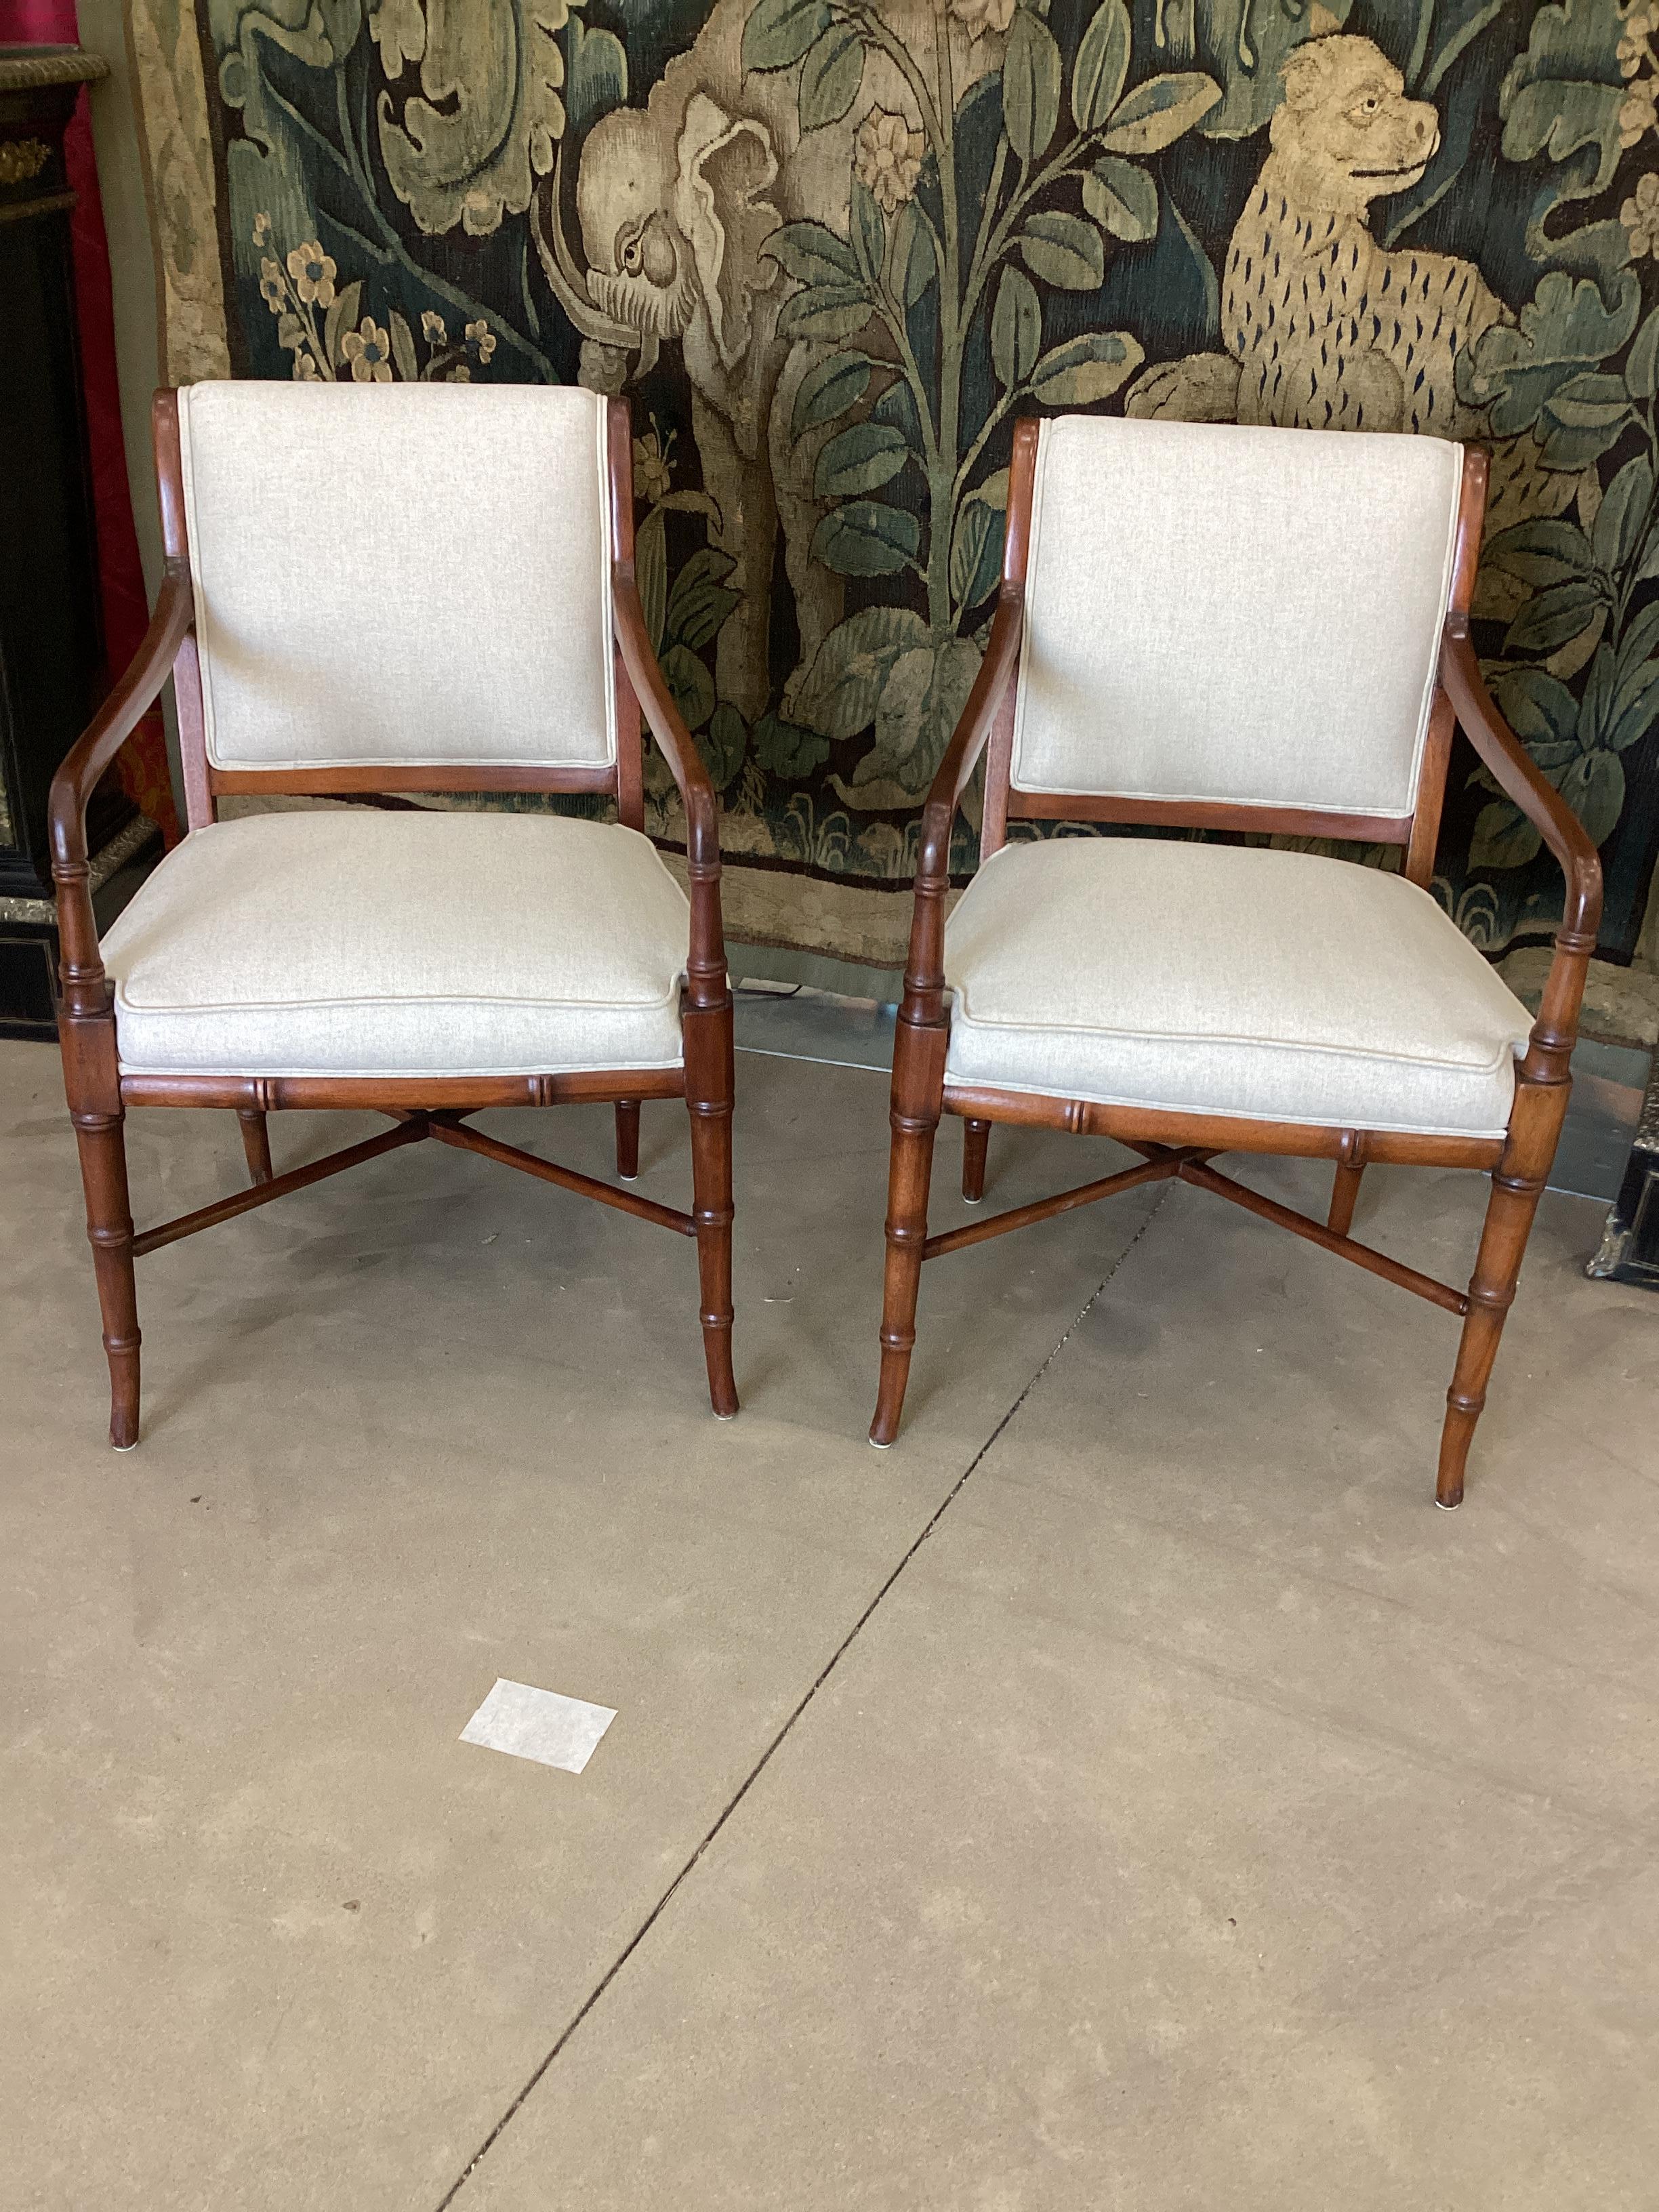 Pair of Faux Bamboo Mahogany Armchairs. Newly upholstered in a light linen fabric. Chairs have been refinished with a new finish in shellac.